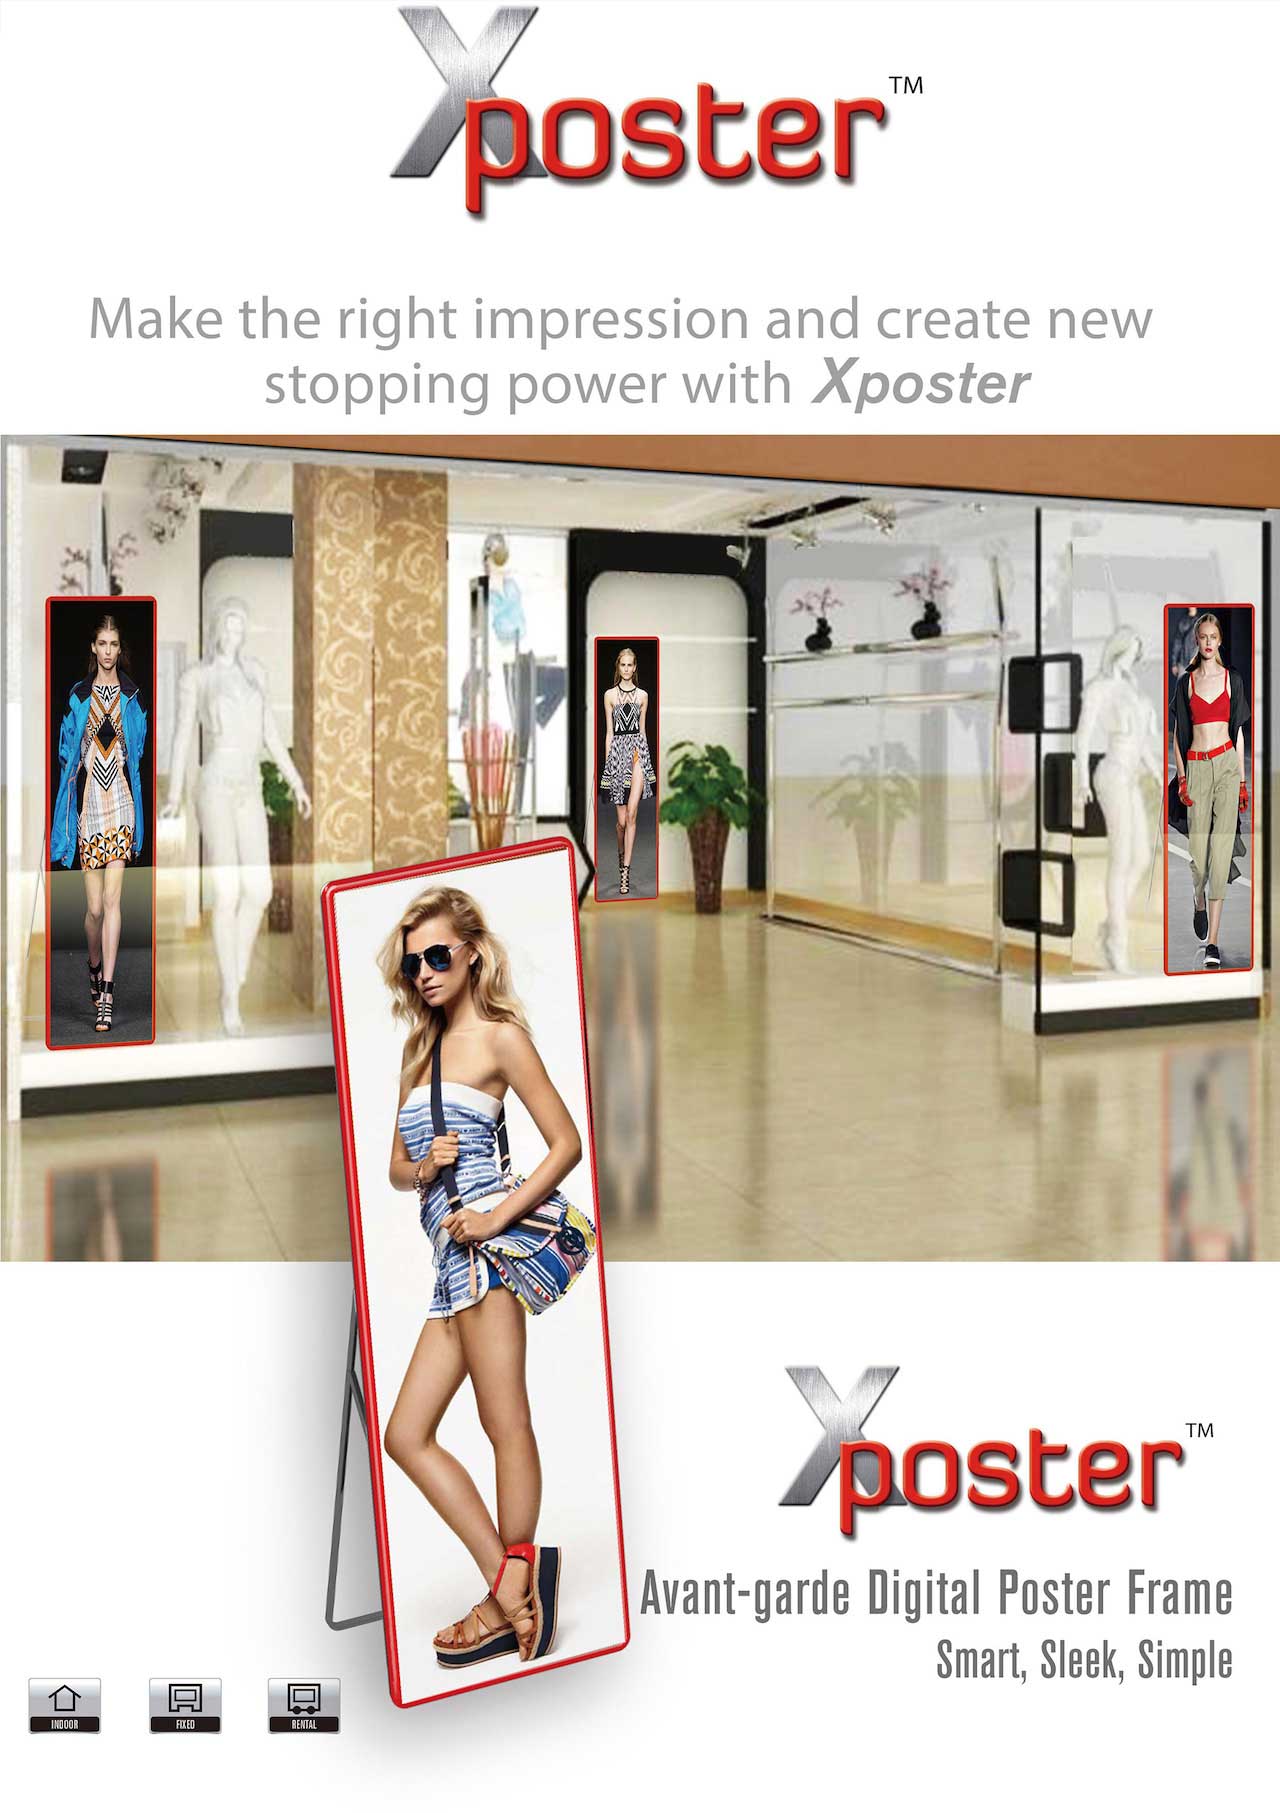 Xposter